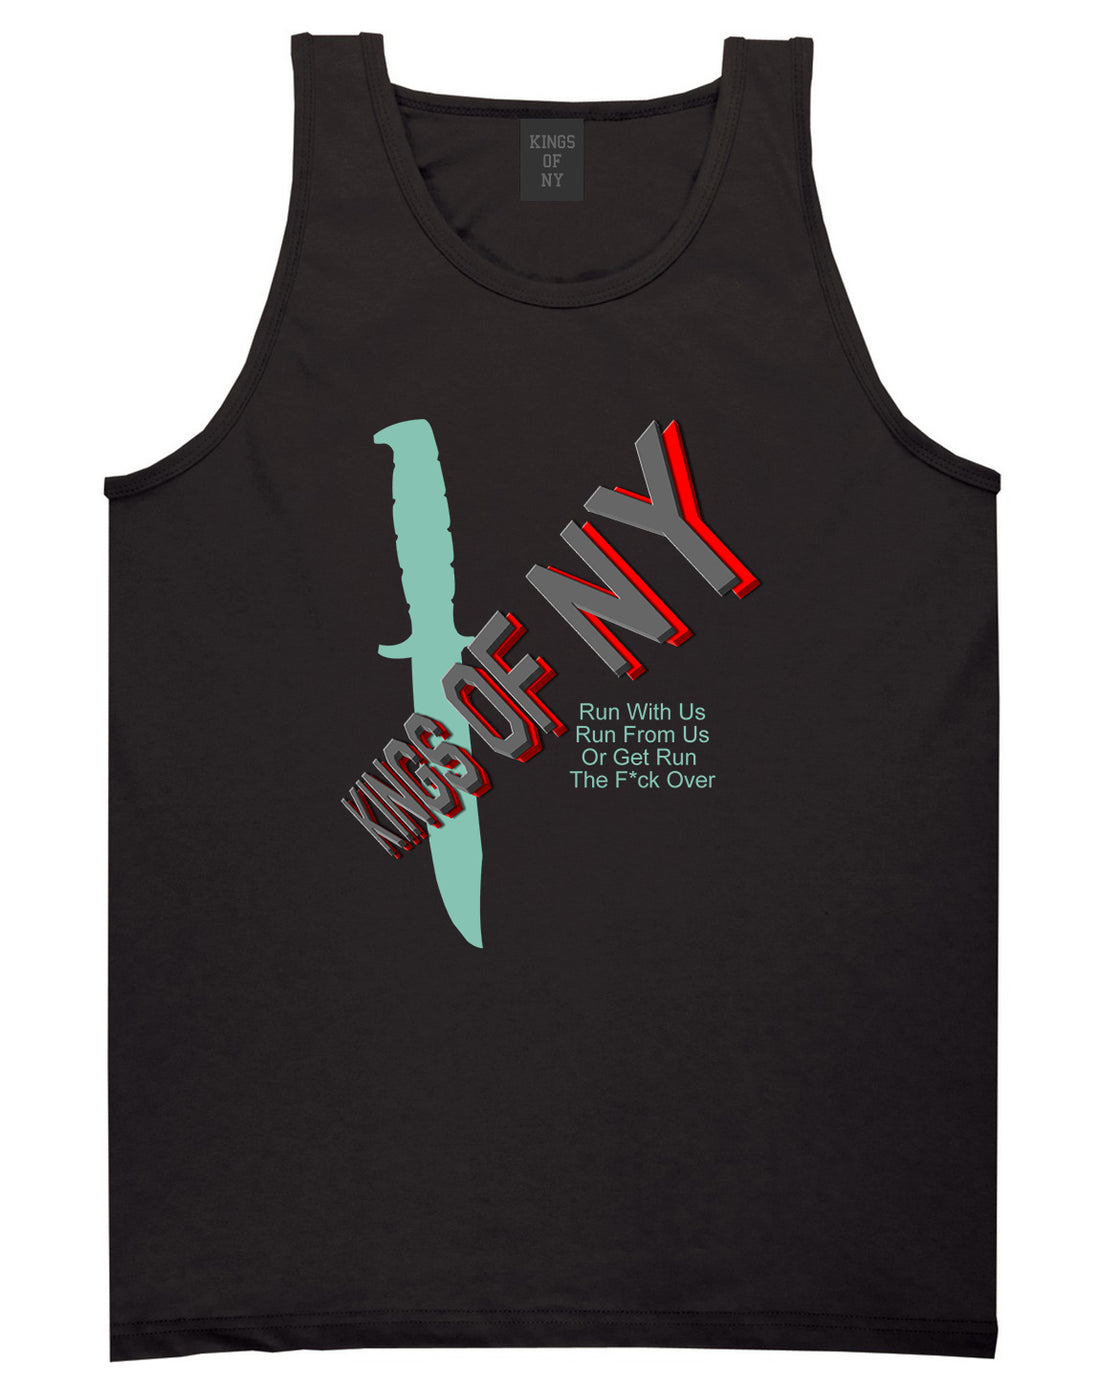 Run With Us Knife Tank Top Shirt in Black